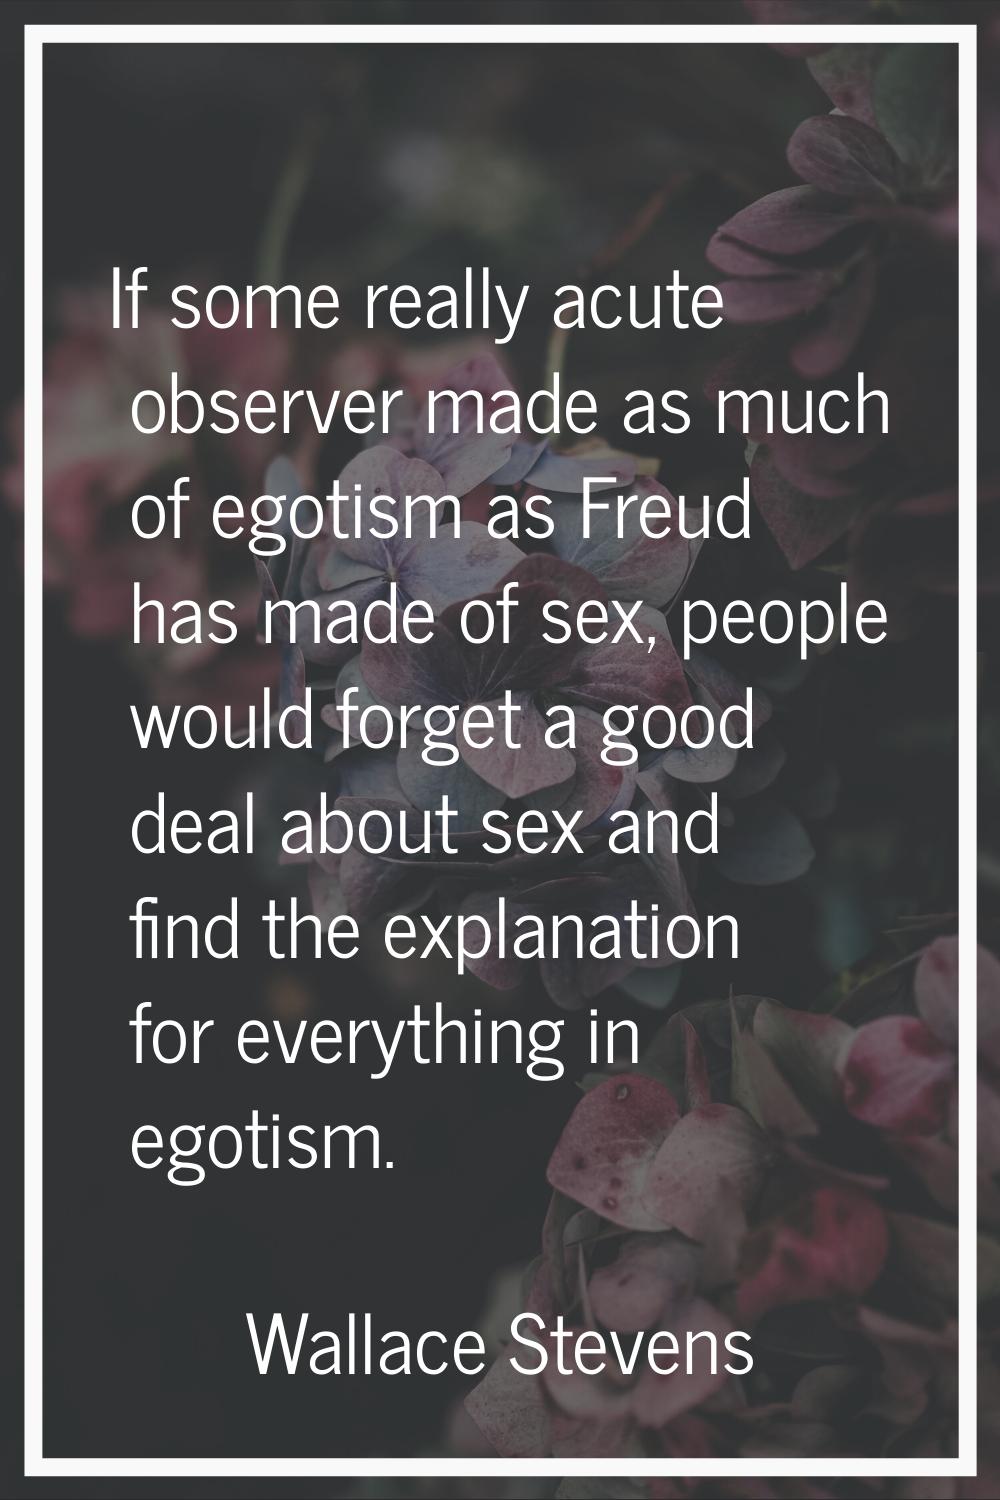 If some really acute observer made as much of egotism as Freud has made of sex, people would forget